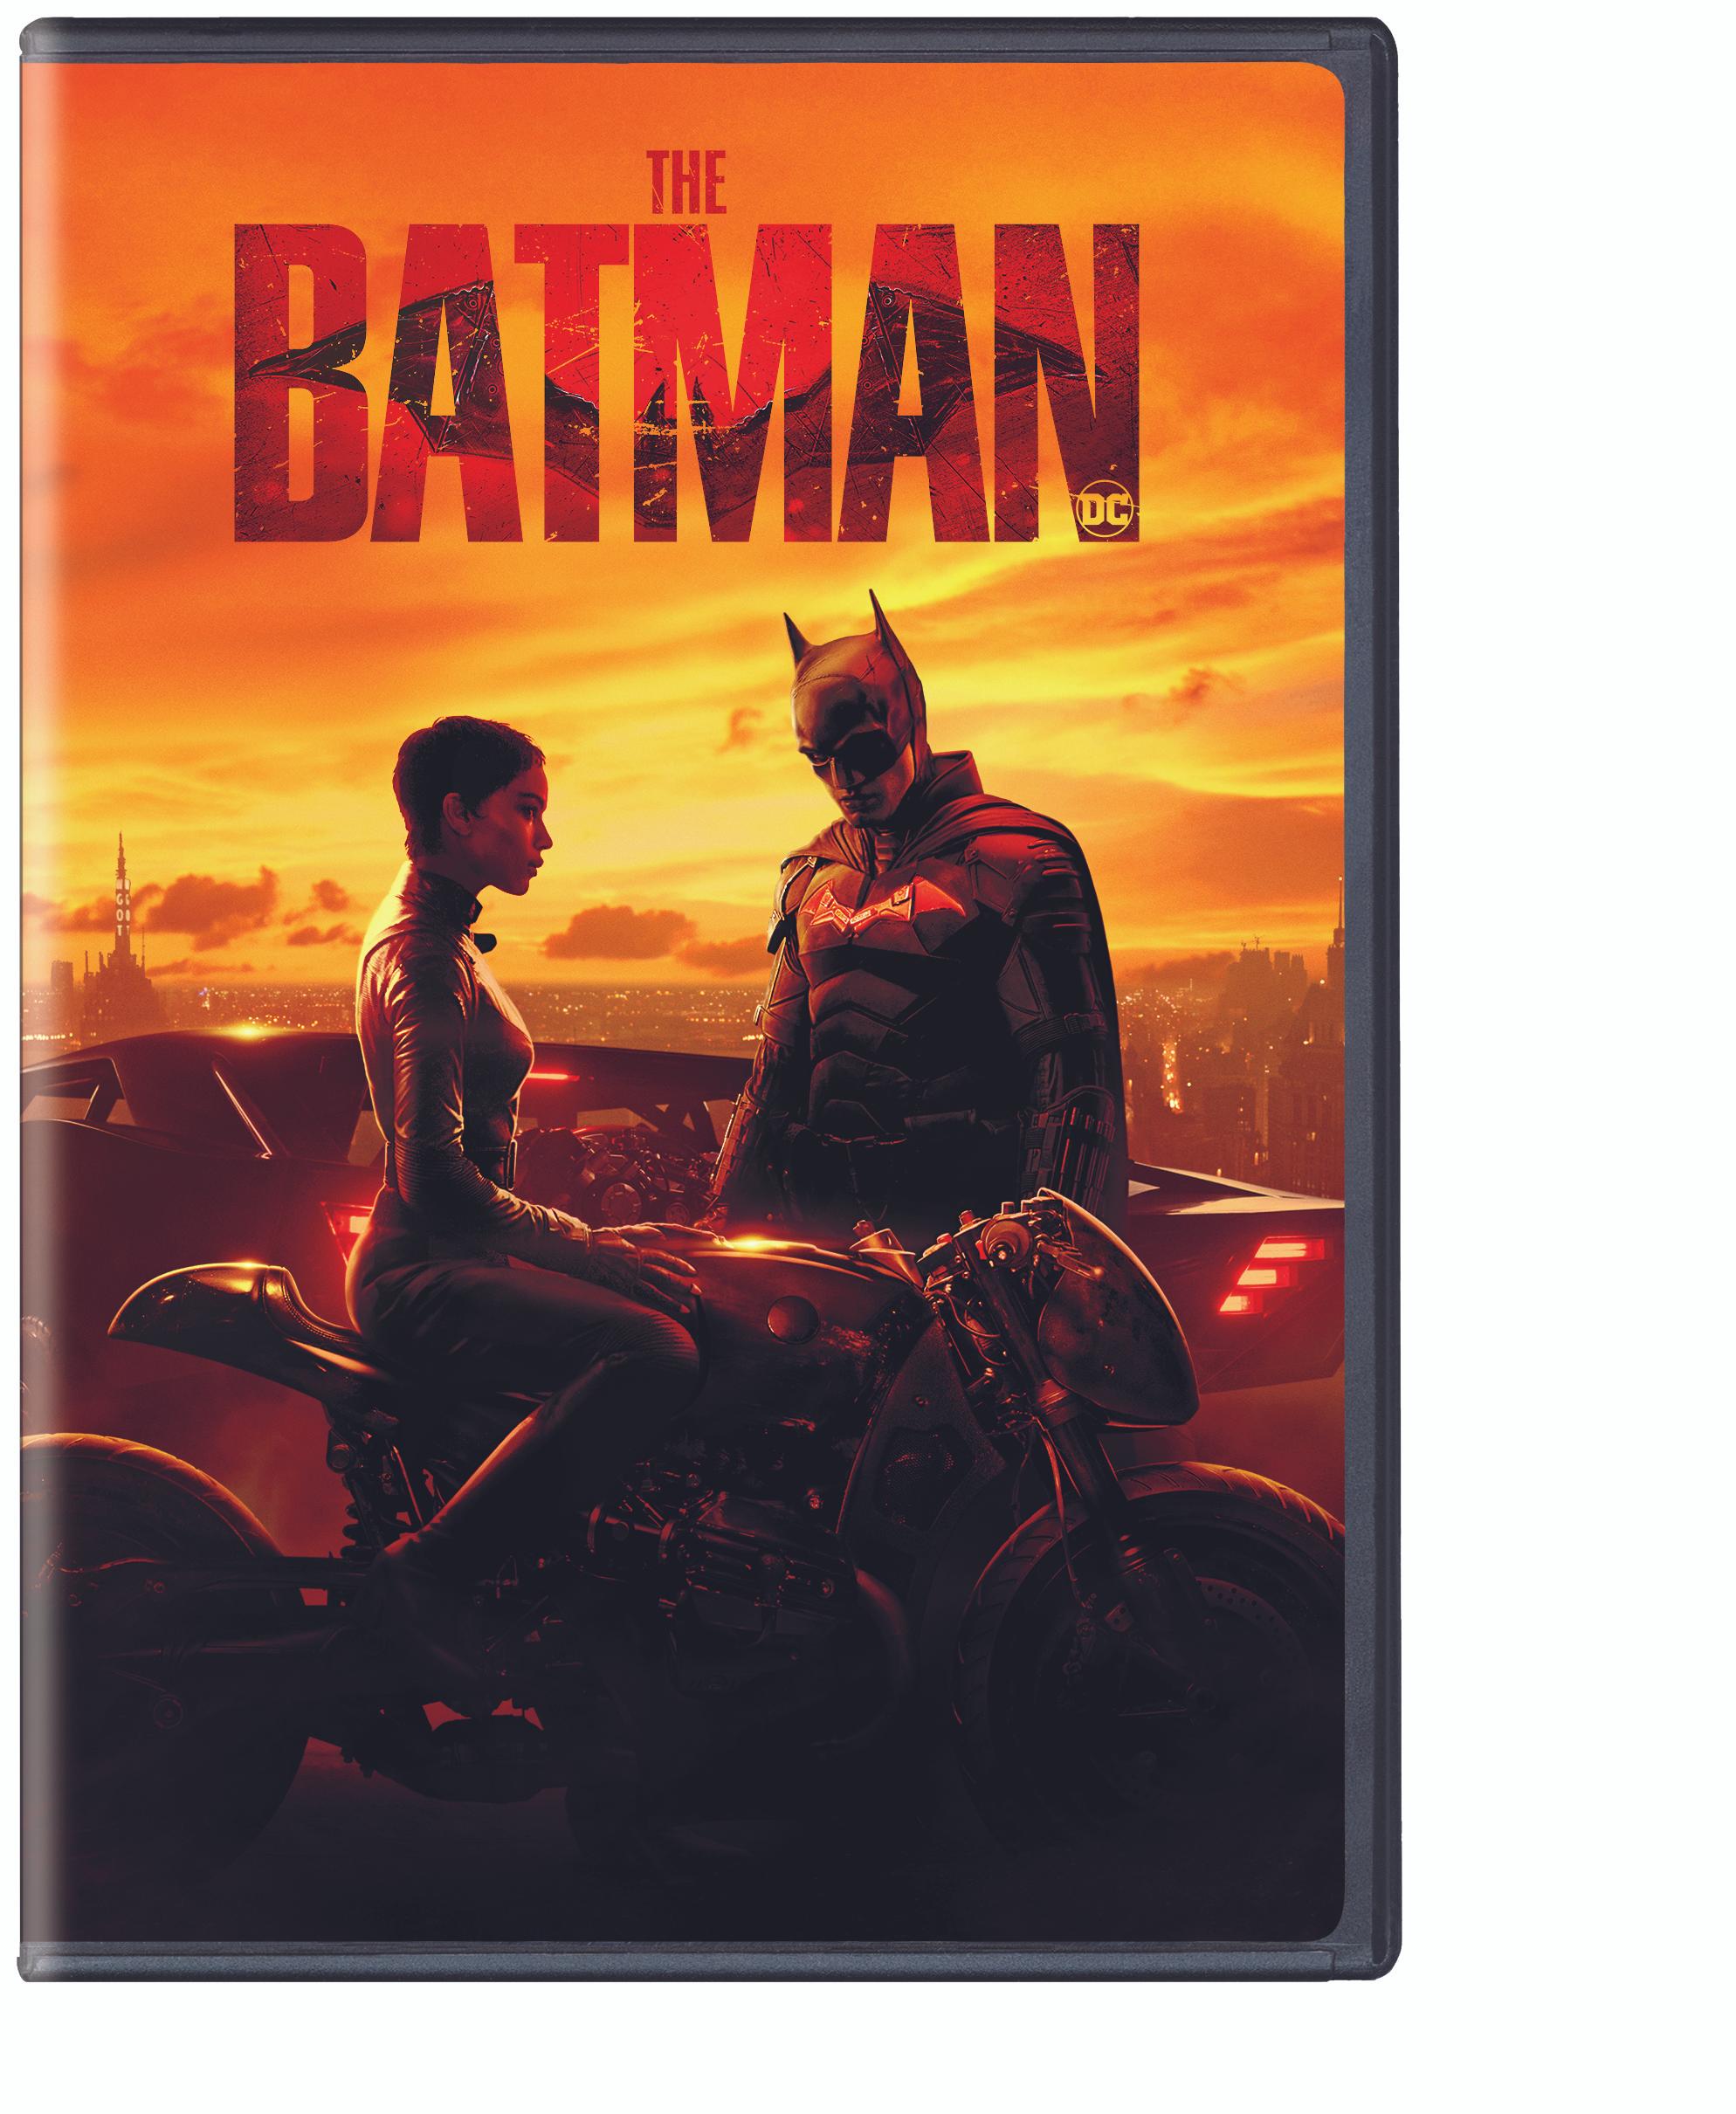 The Batman - DVD [ 2022 ]  - Action Movies On DVD - Movies On GRUV